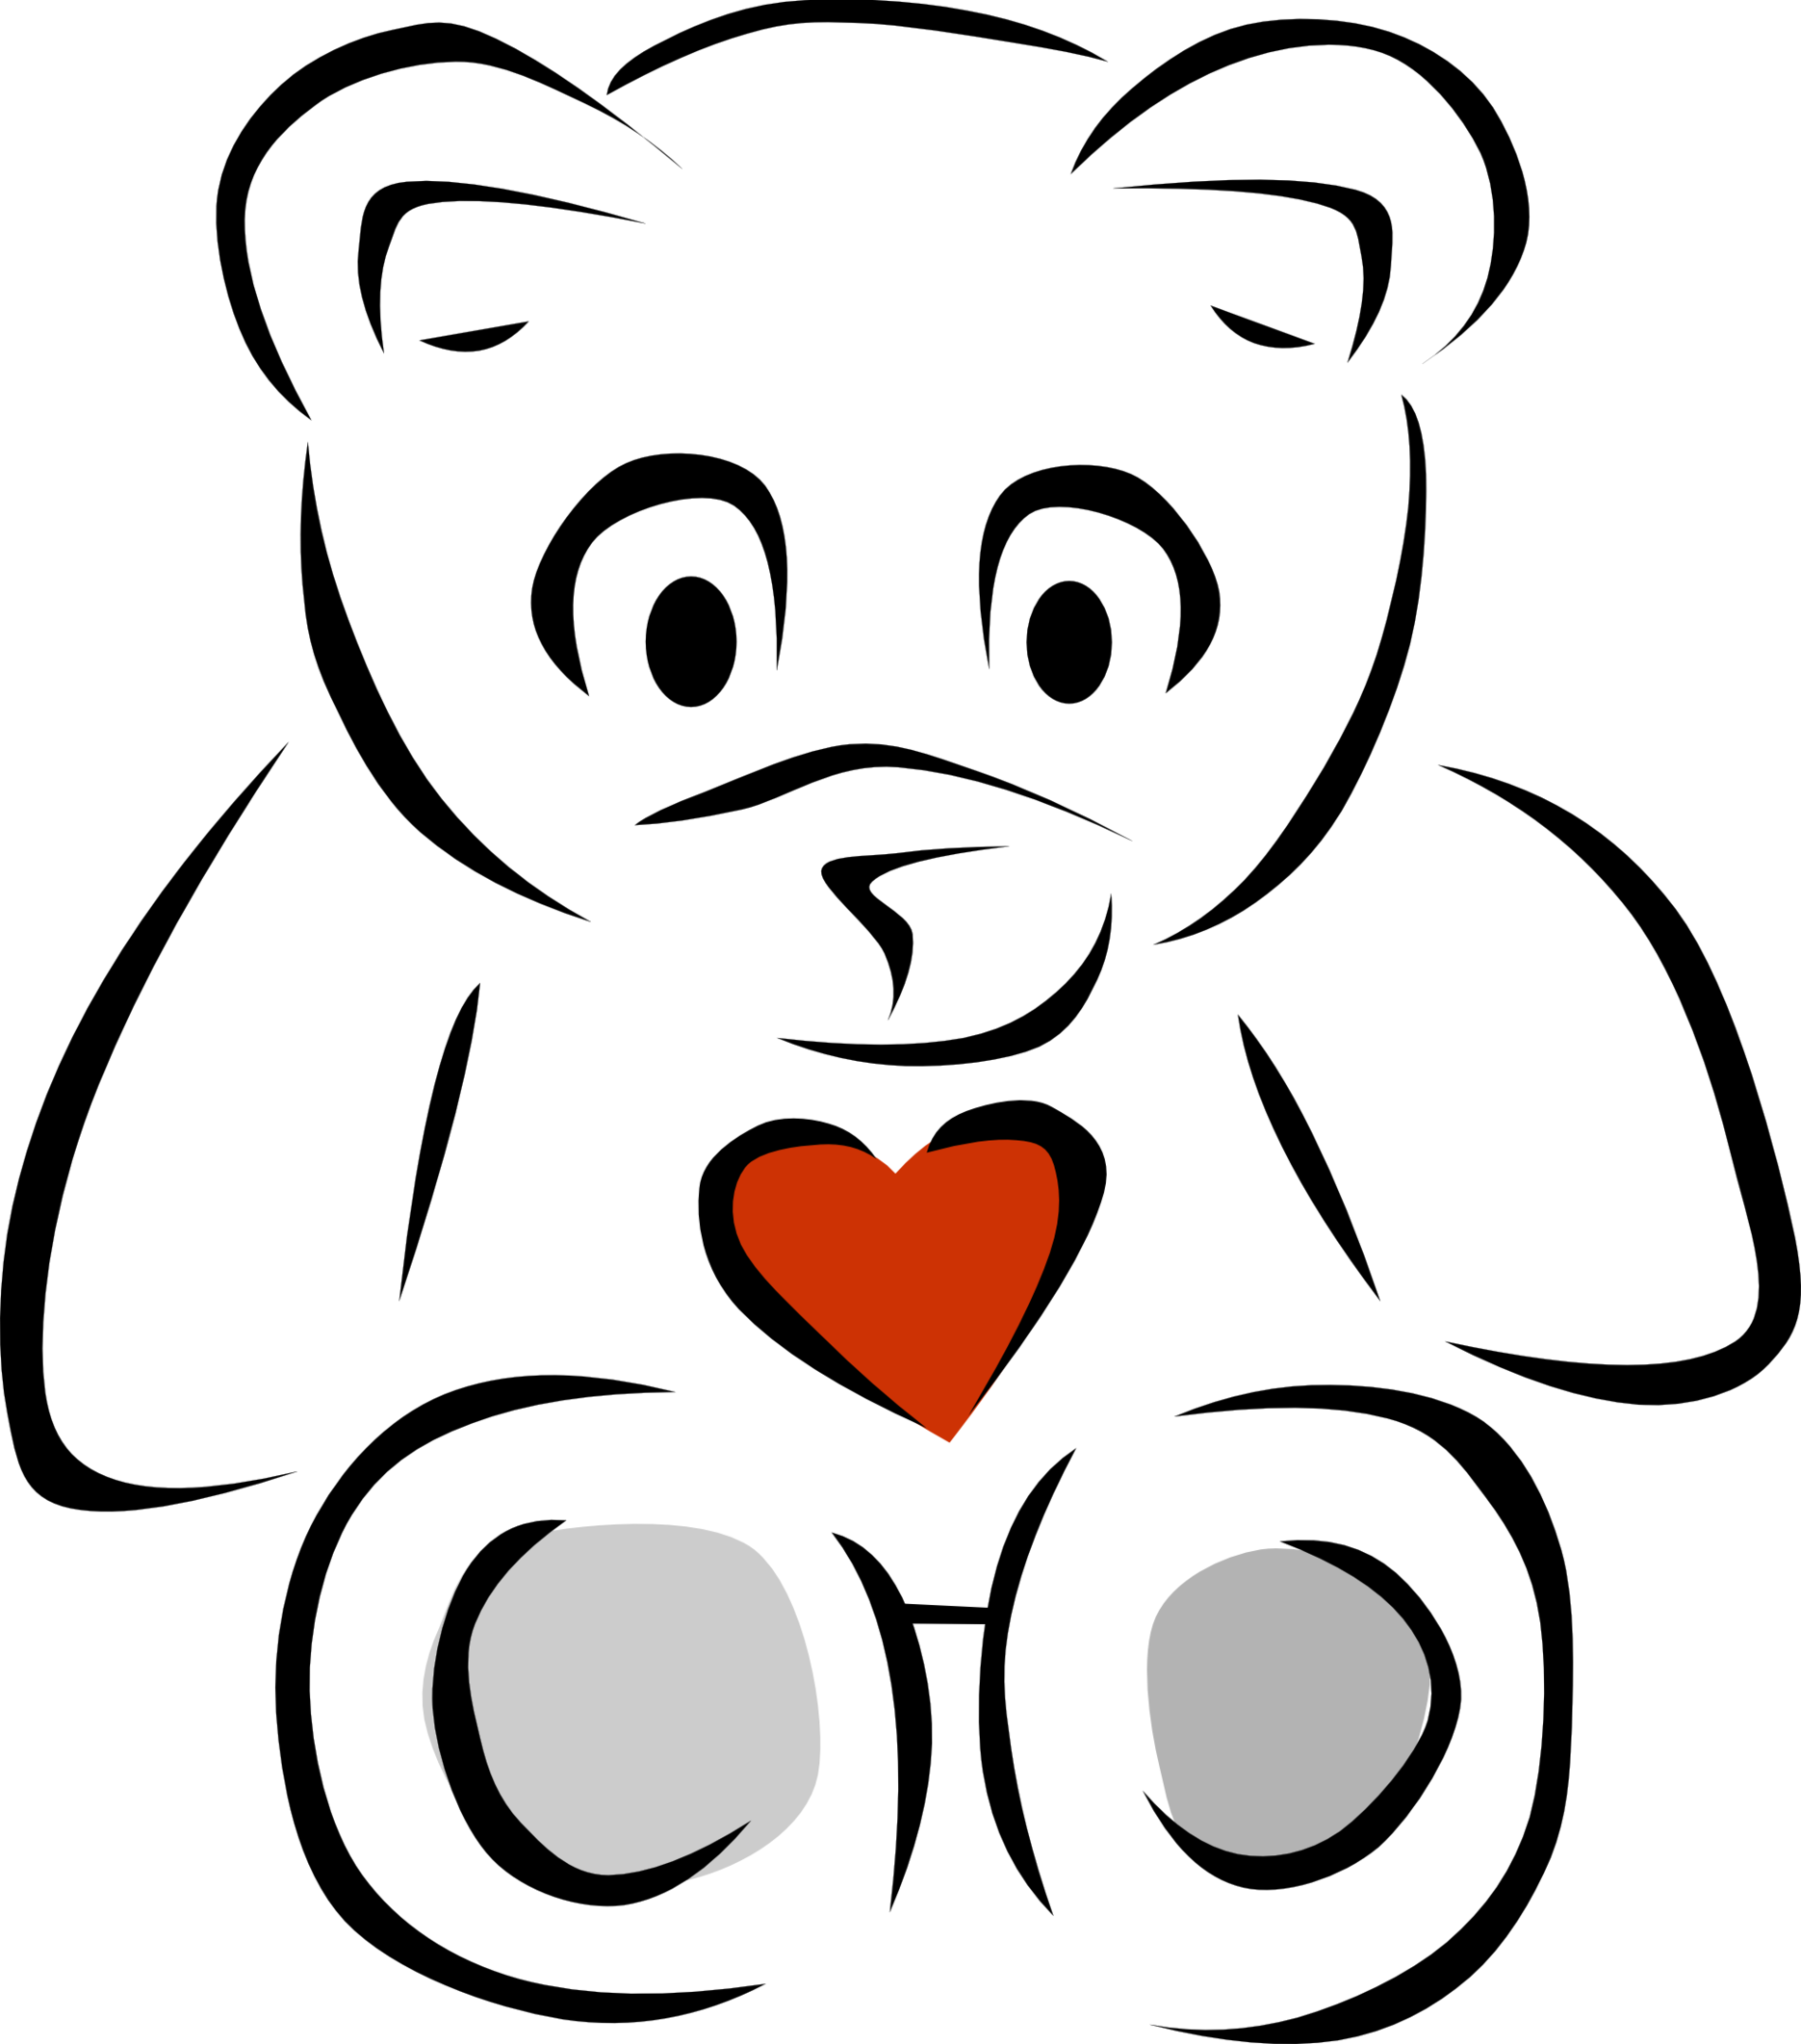 Teddy Bear Black And White Black And White Pictures - Teddy Bear Line Art (1871x2123)